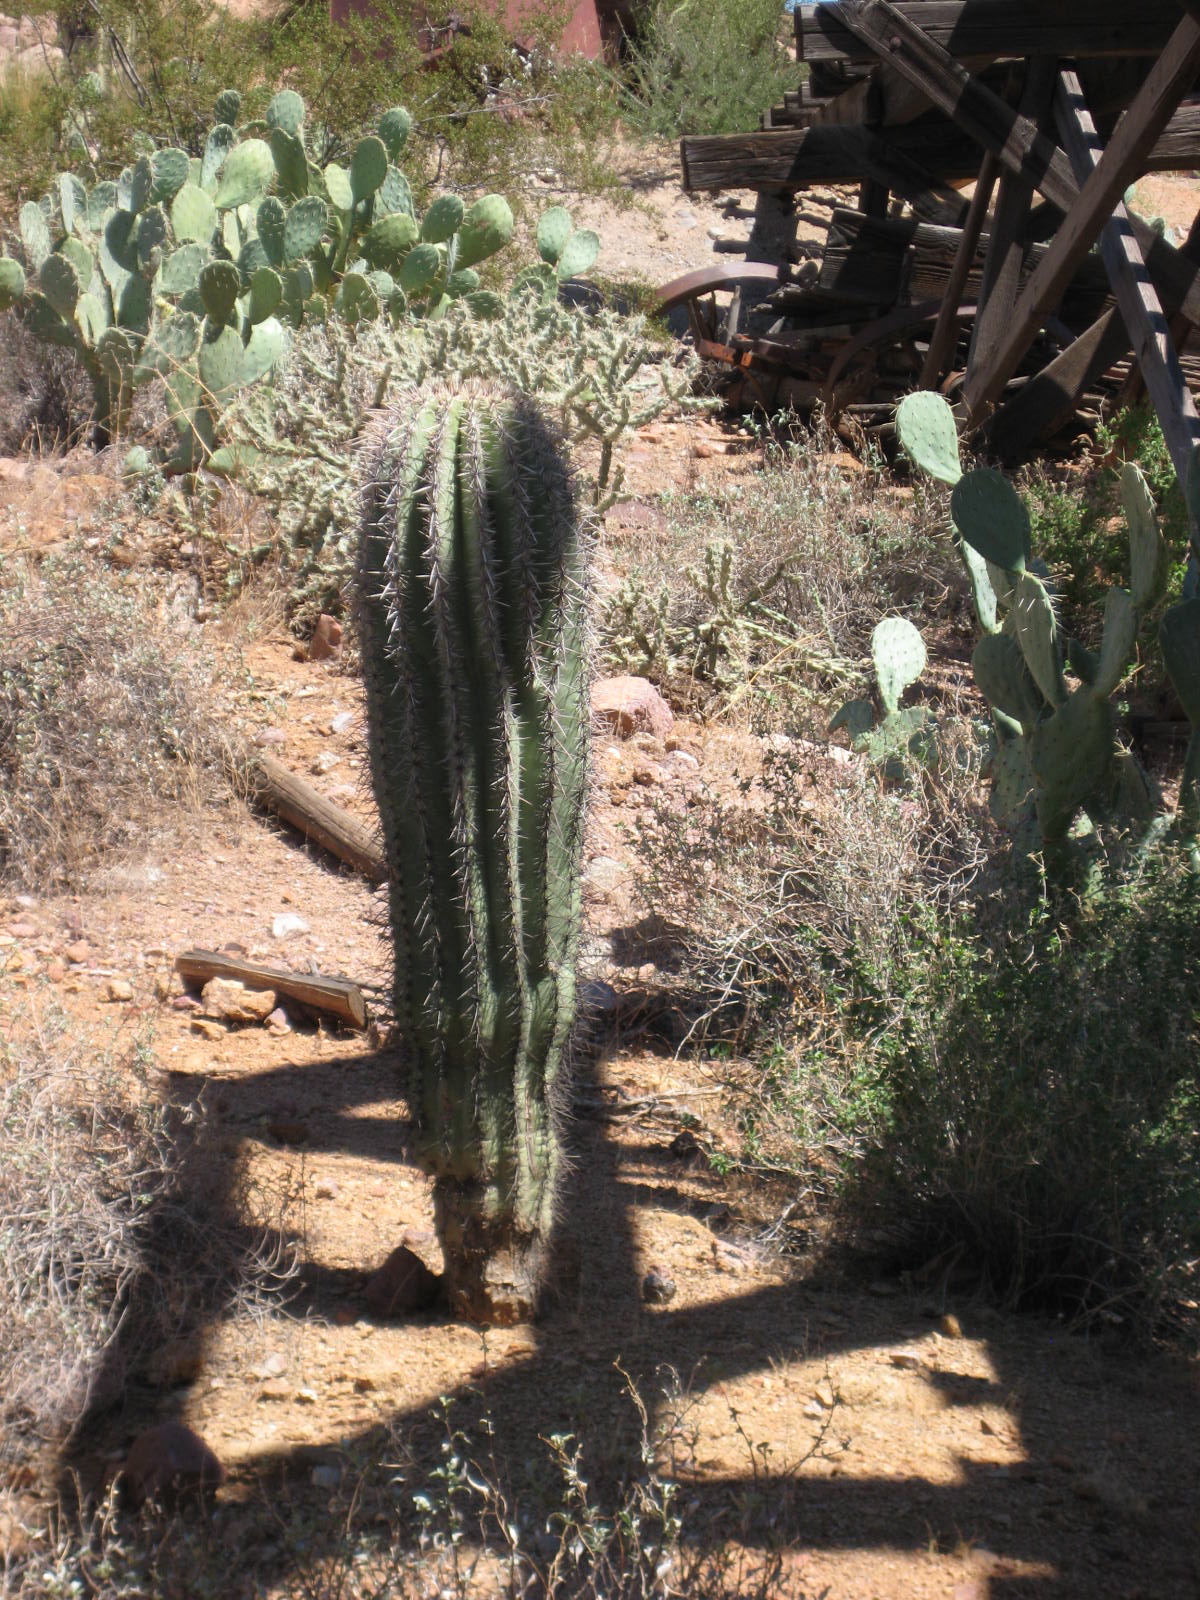 Average Growth Rate Of A Saguaro Cactus / But they won't grow much if